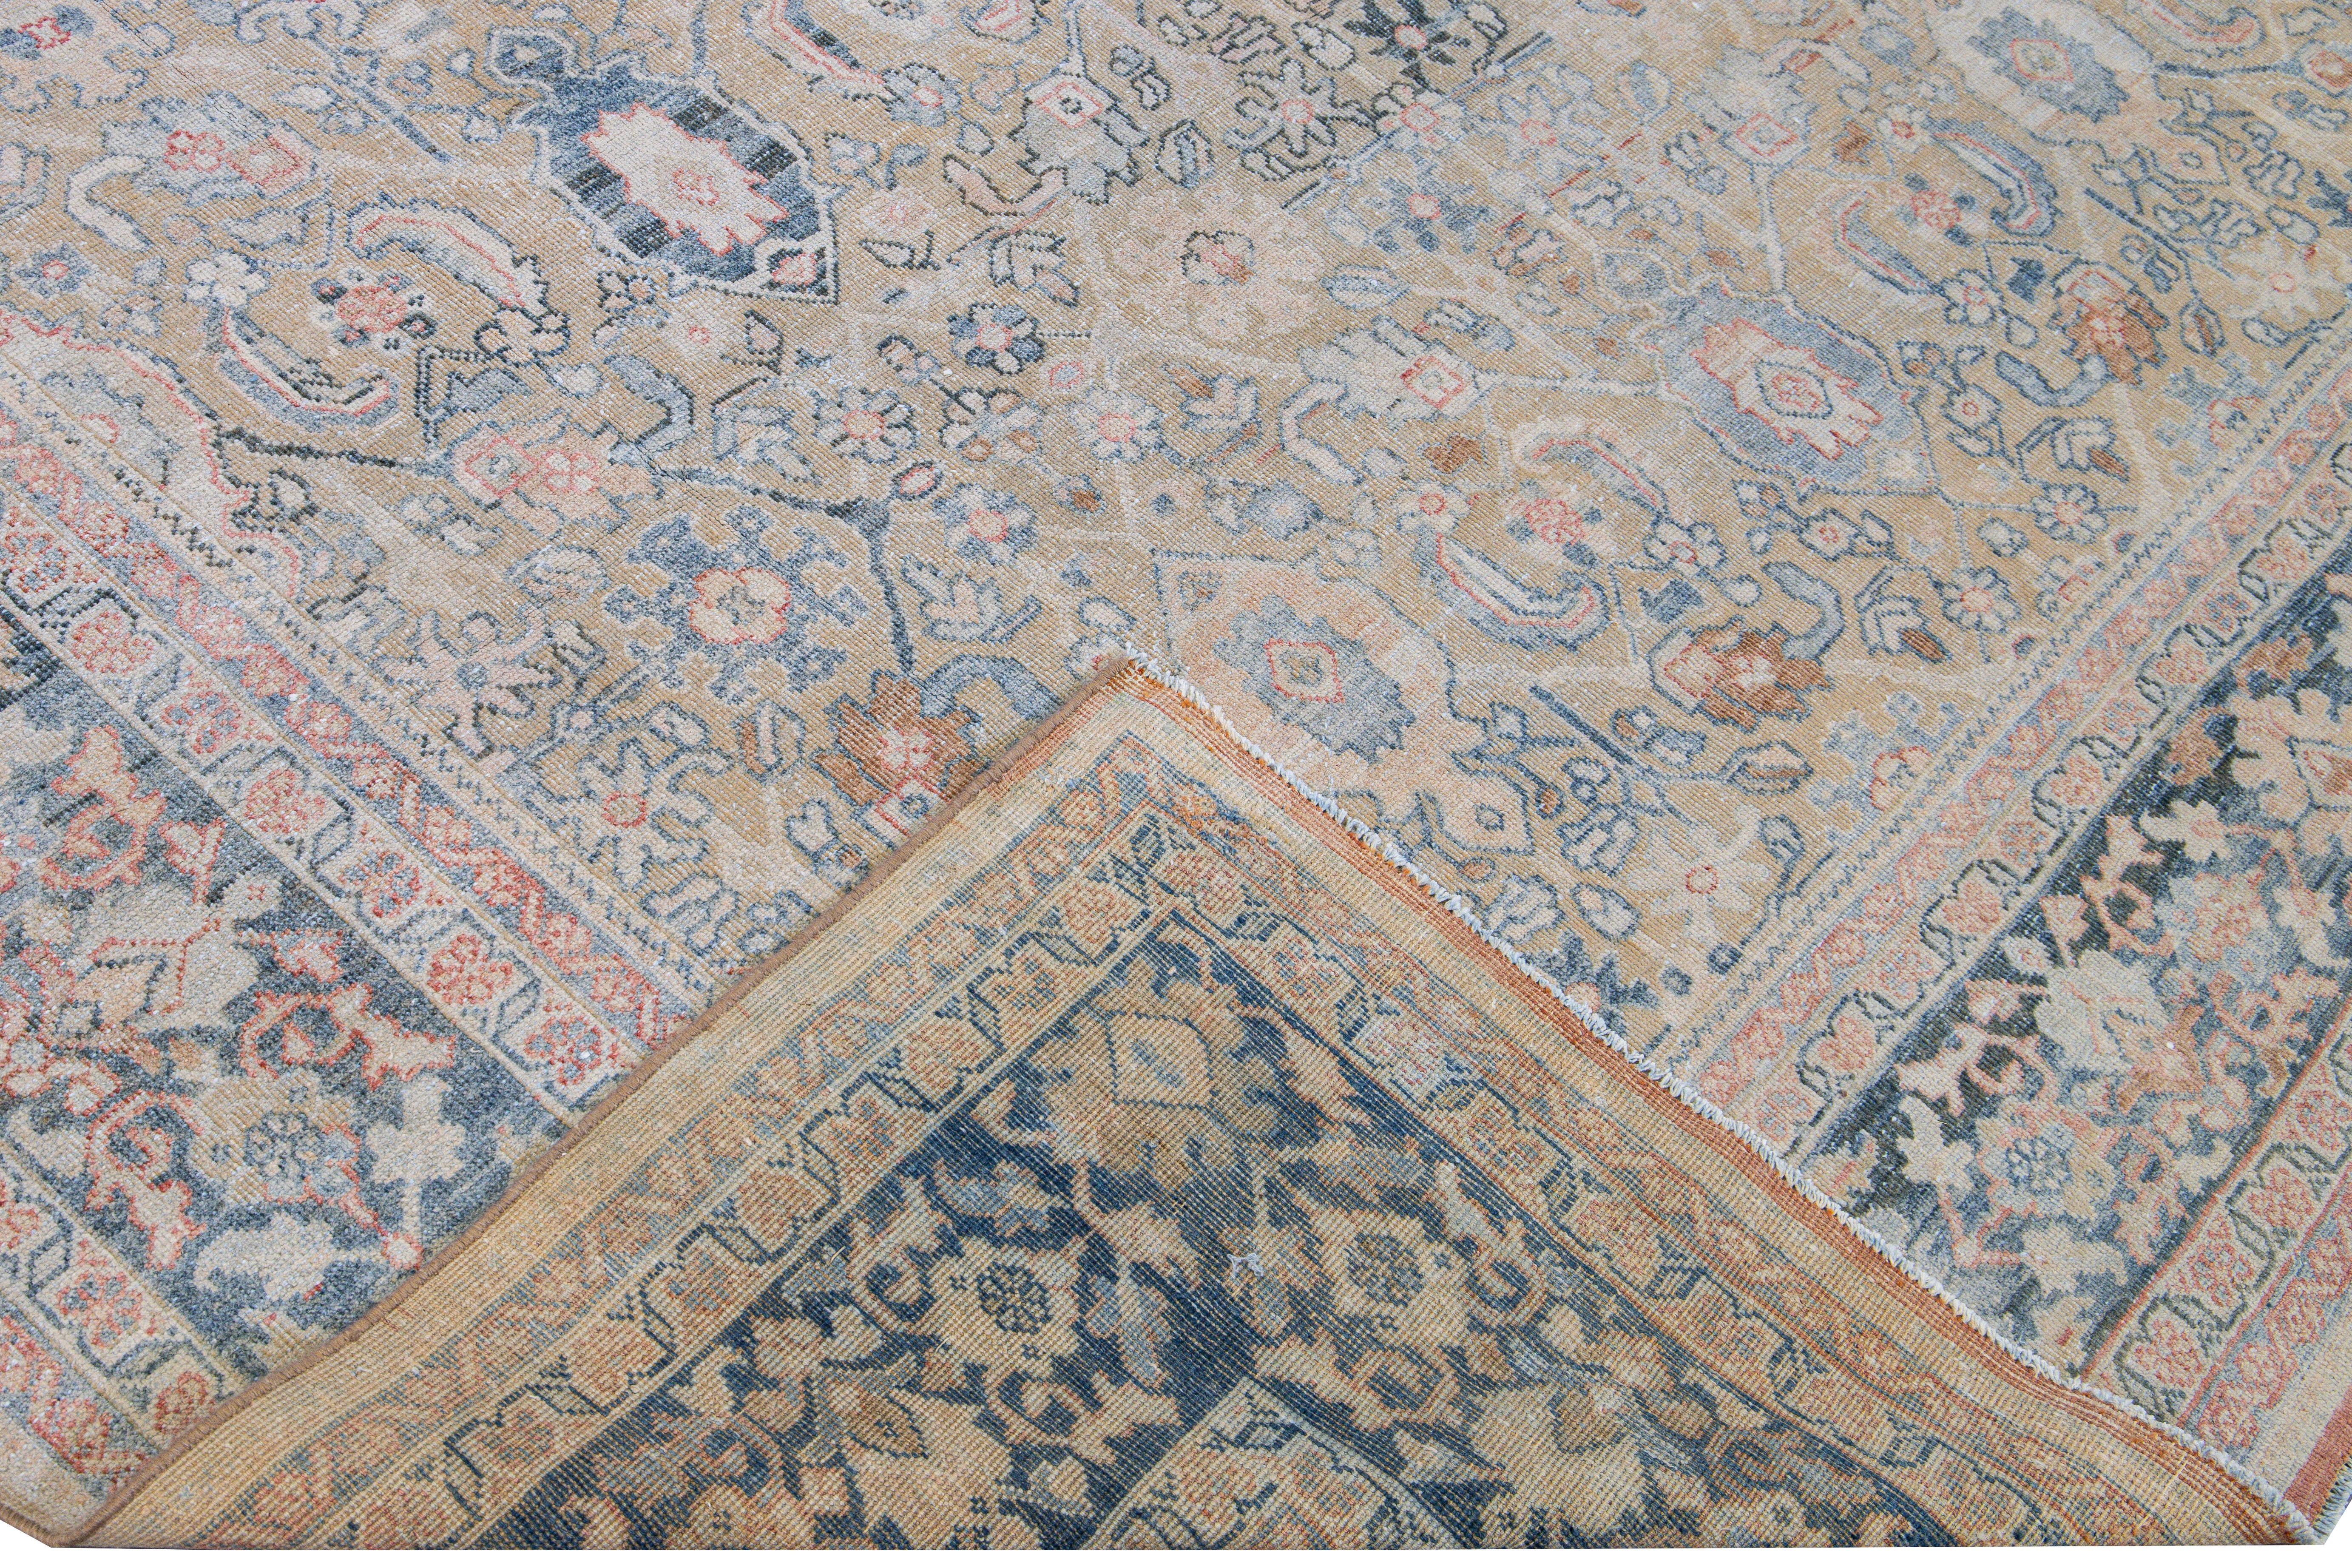 Beautiful hand-knotted antique Mahal wool rug with the beige field. This Persian rug has a blue frame and pink accents featuring a traditional floral pattern design. 

This rug measures 9'1